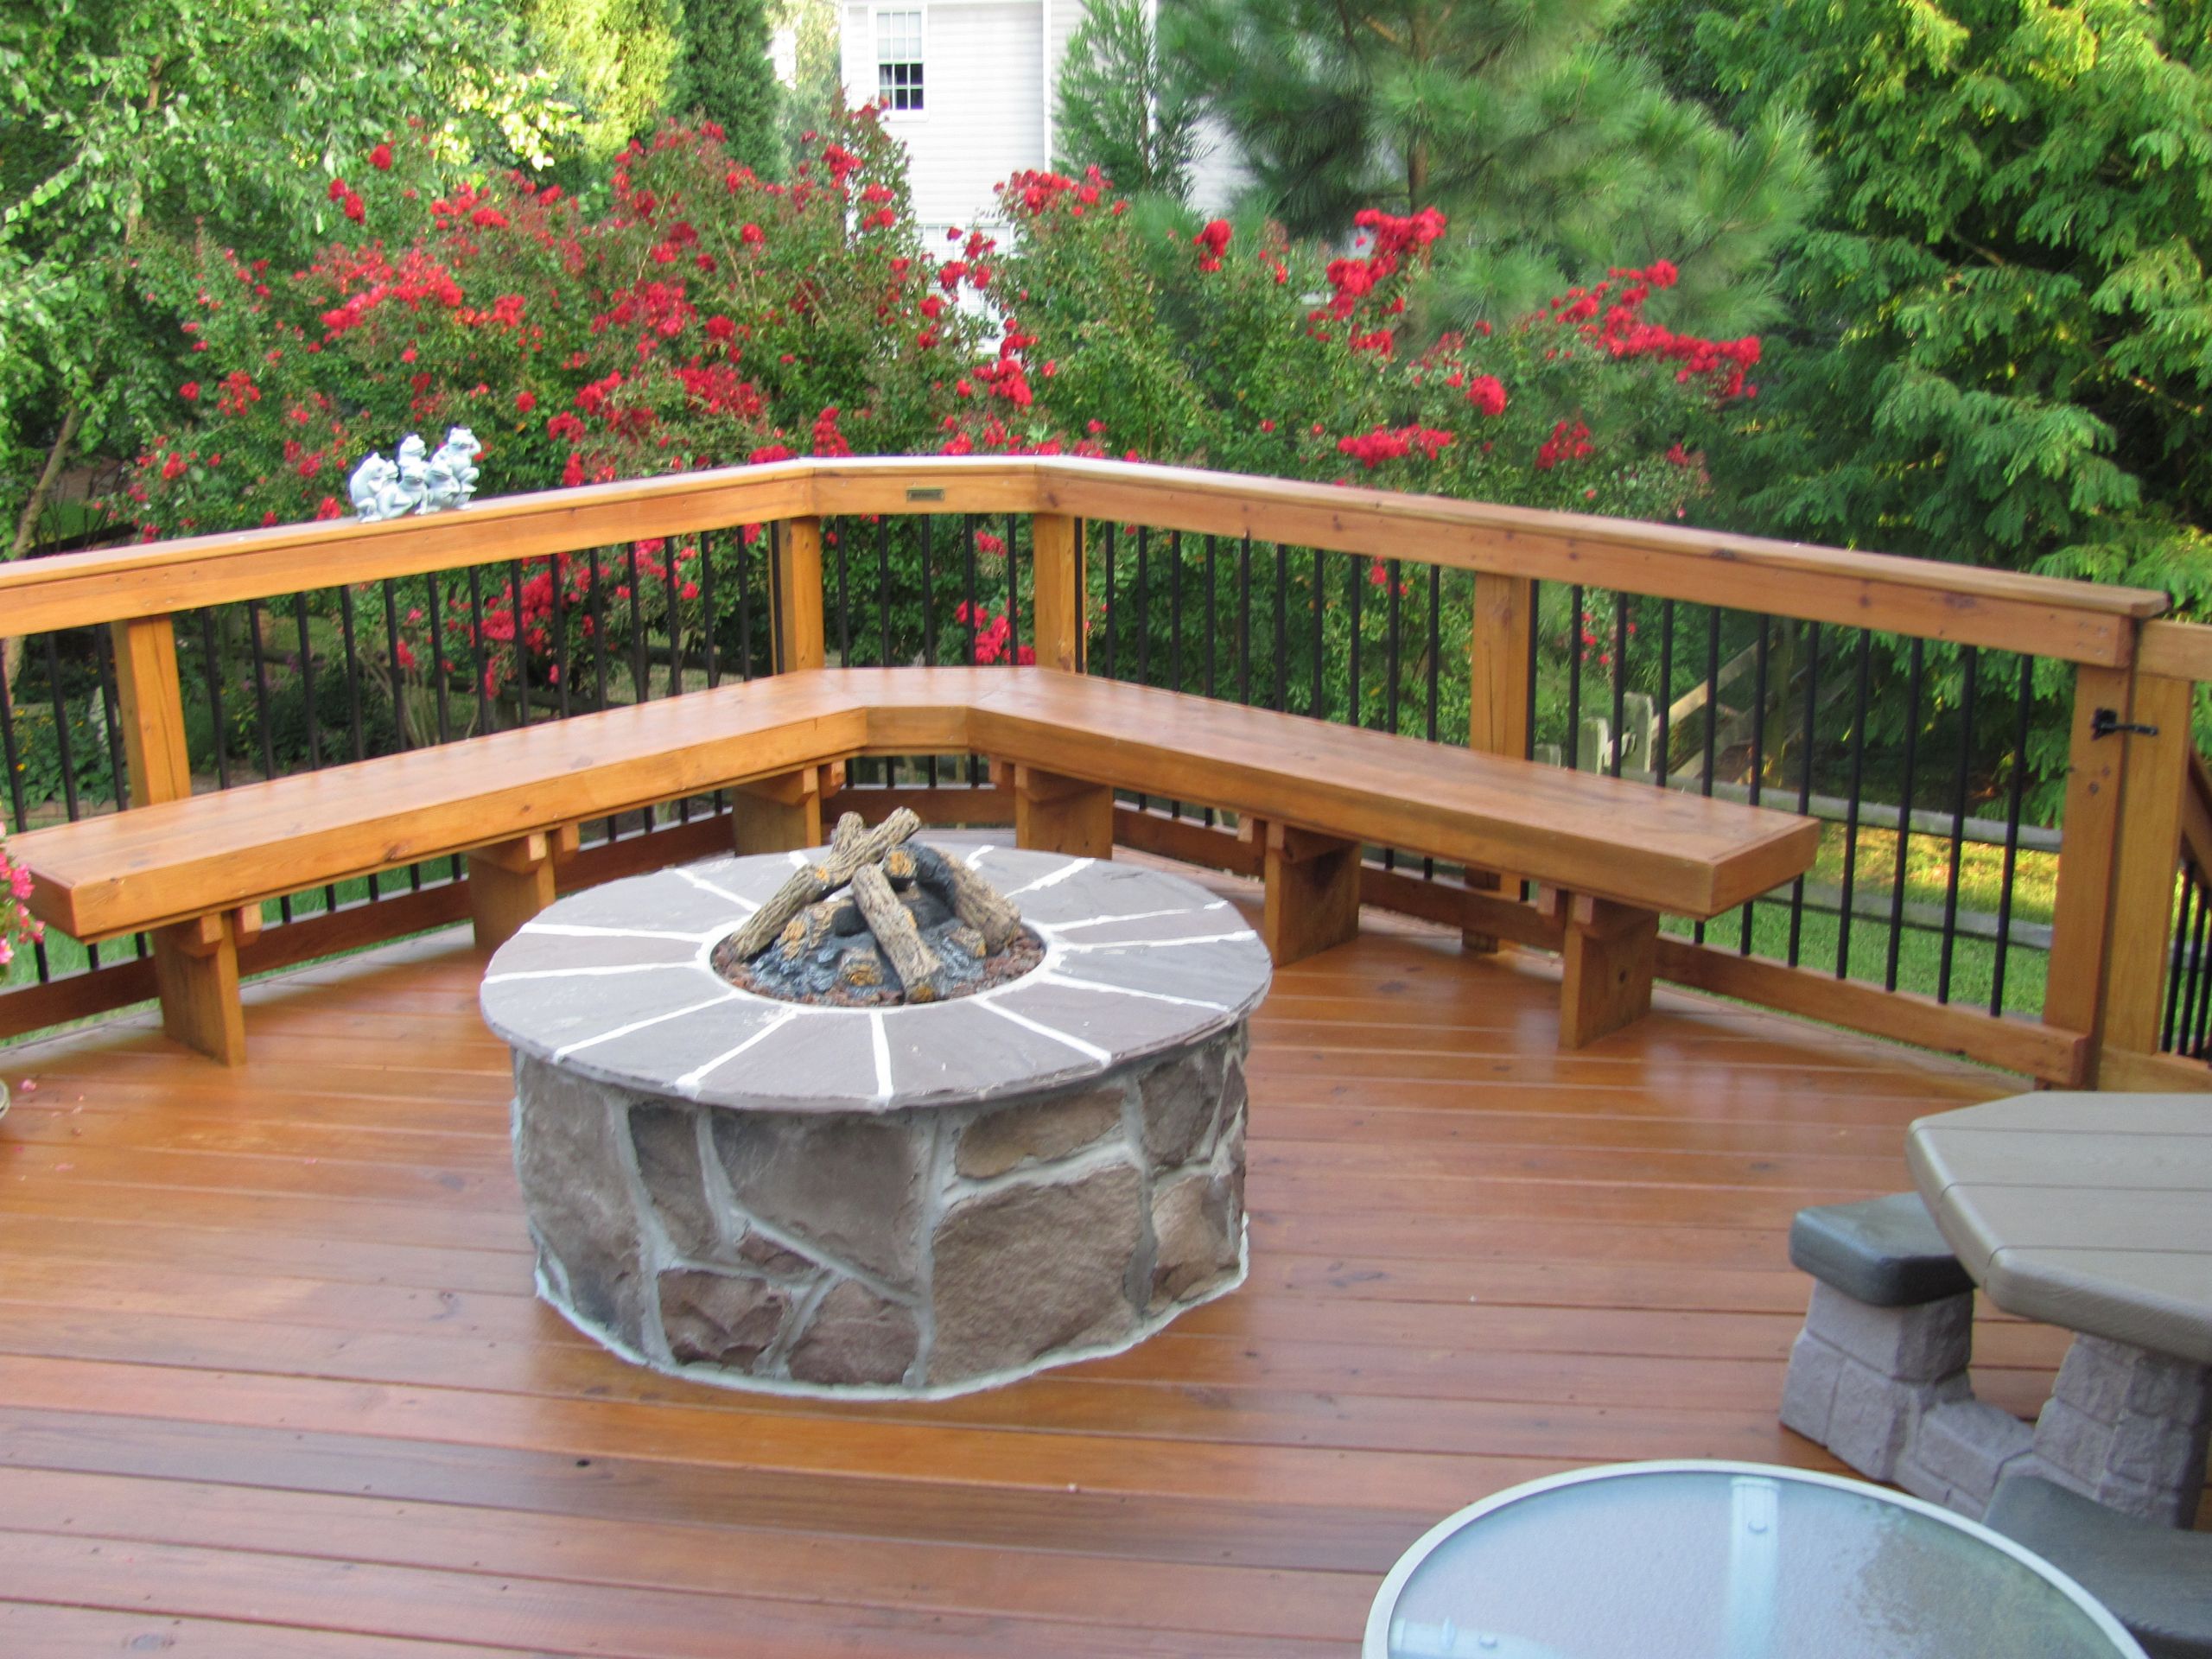 Fire Pit On Wood Deck
 Archadeck deck in Charlotte with fire pit